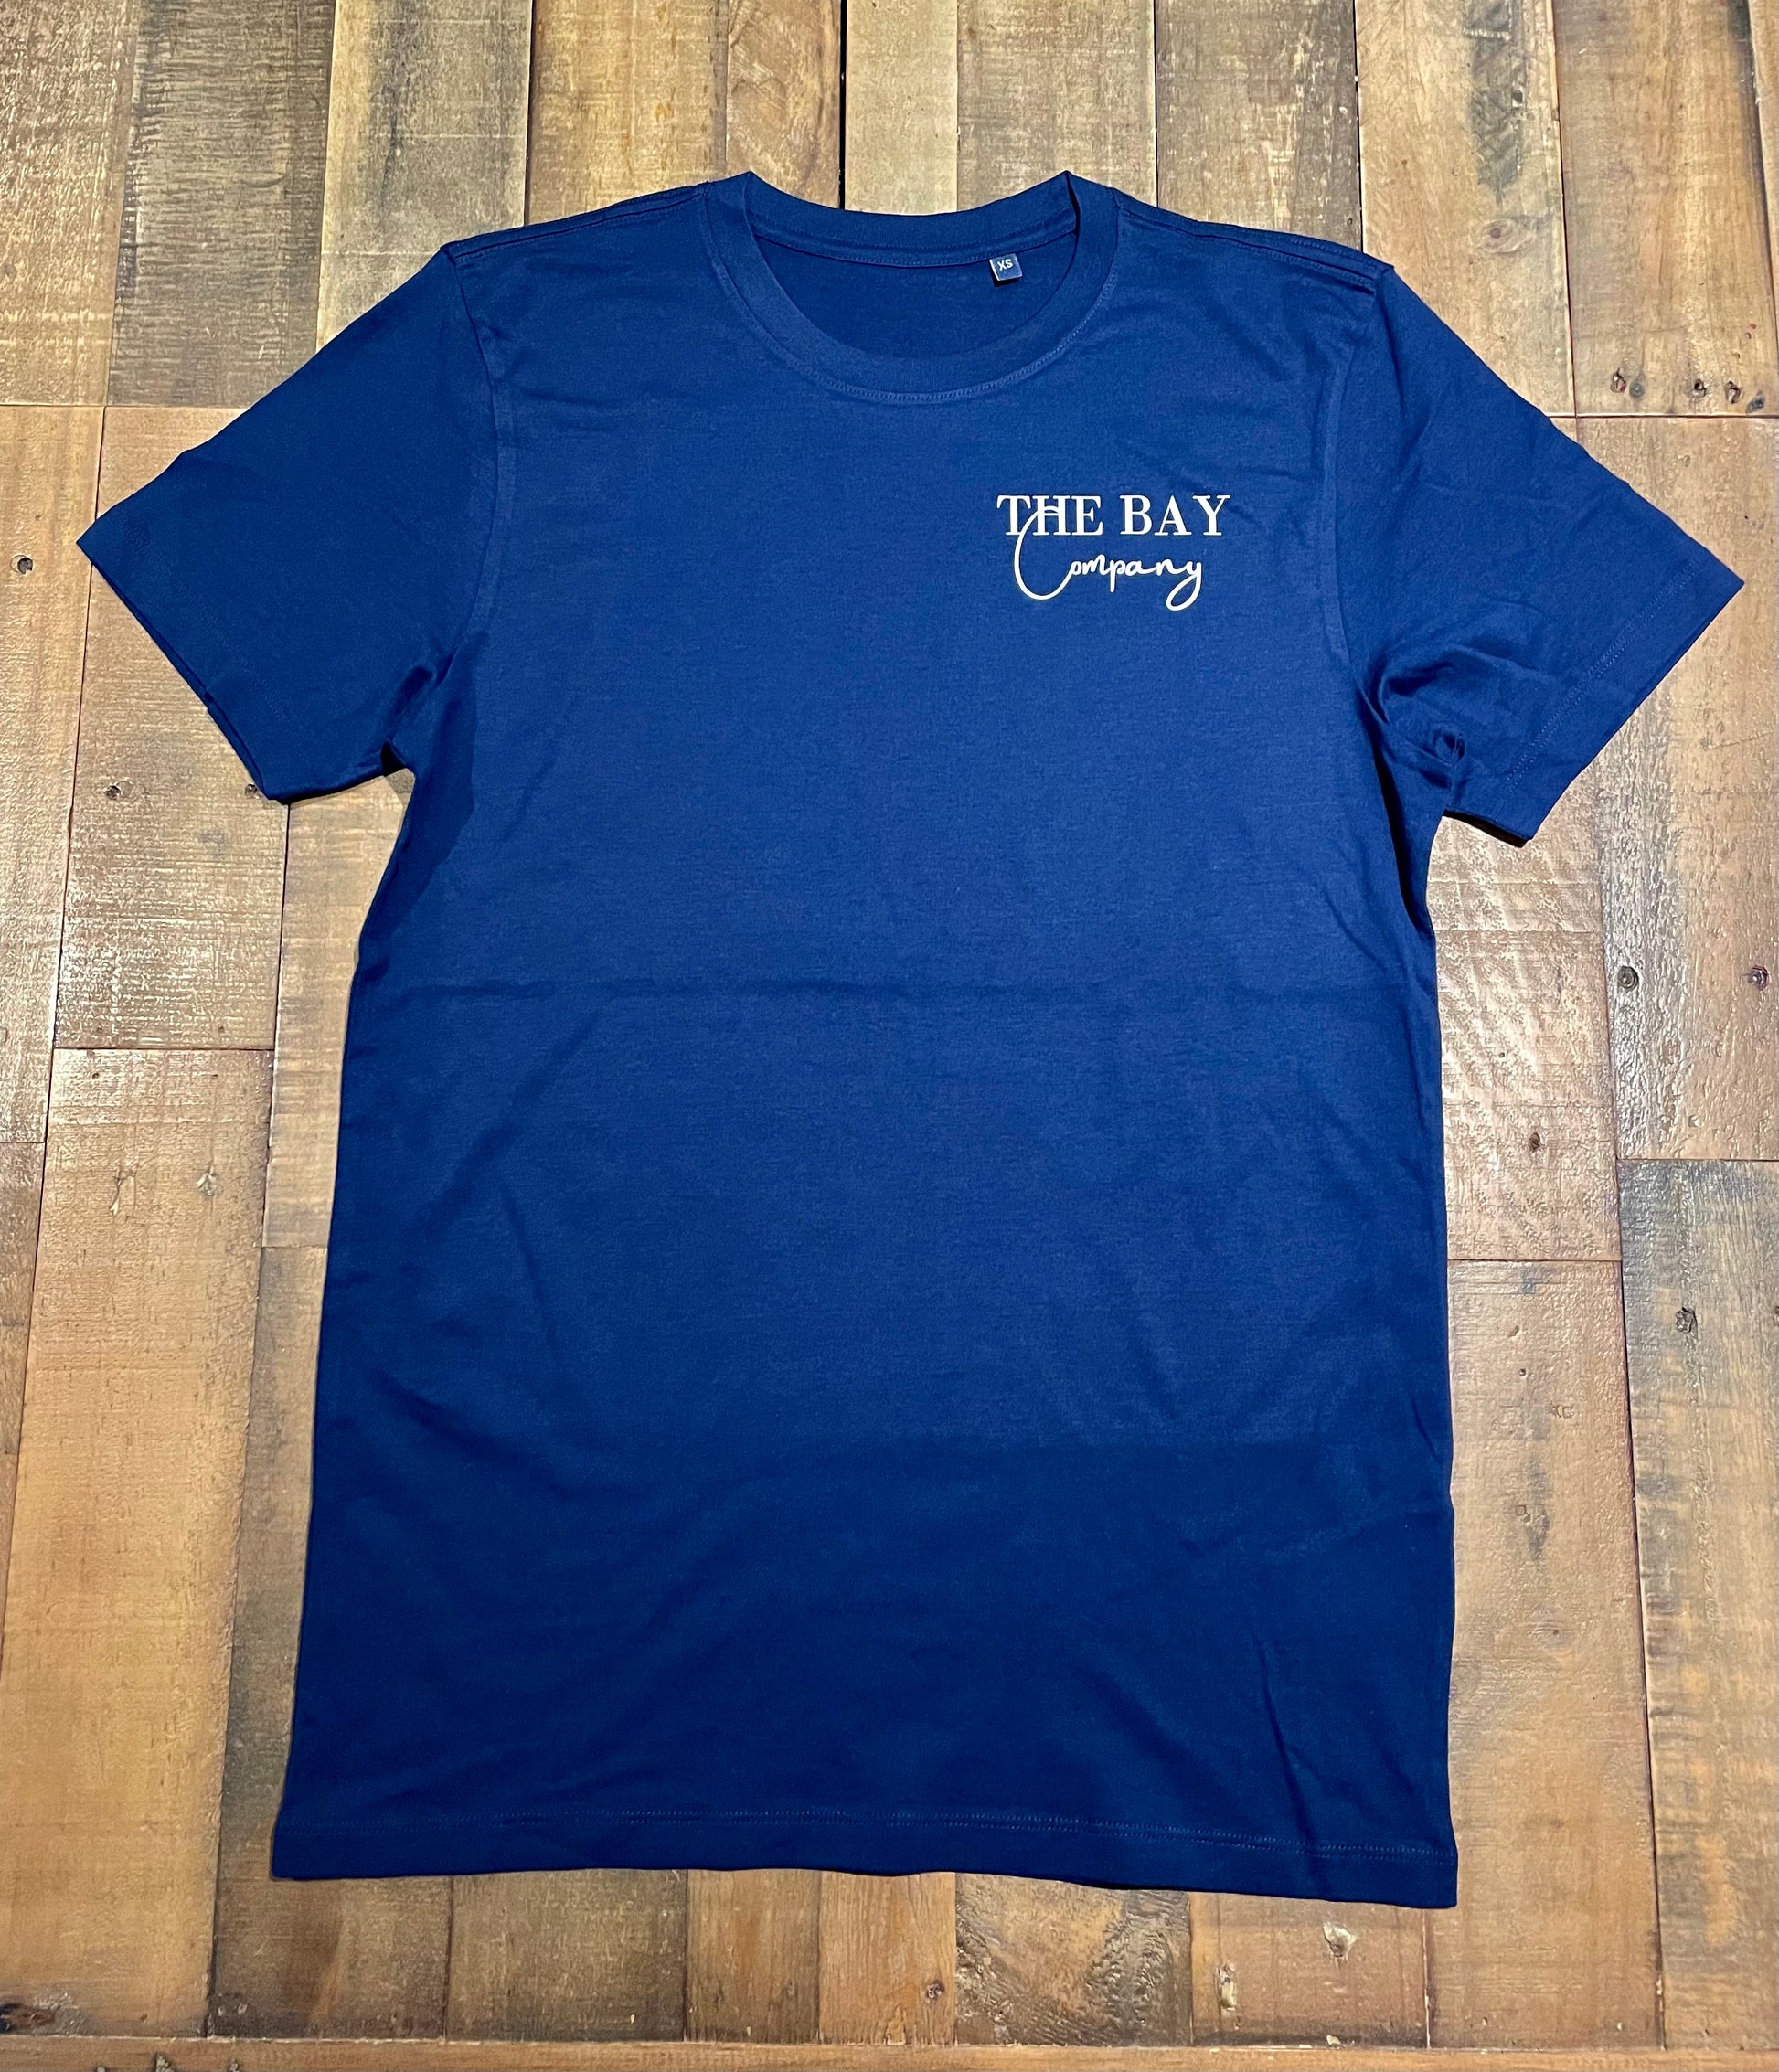 The unisex Robin Hood’s Bay T-shirts in navy blue from The Bay Company. 